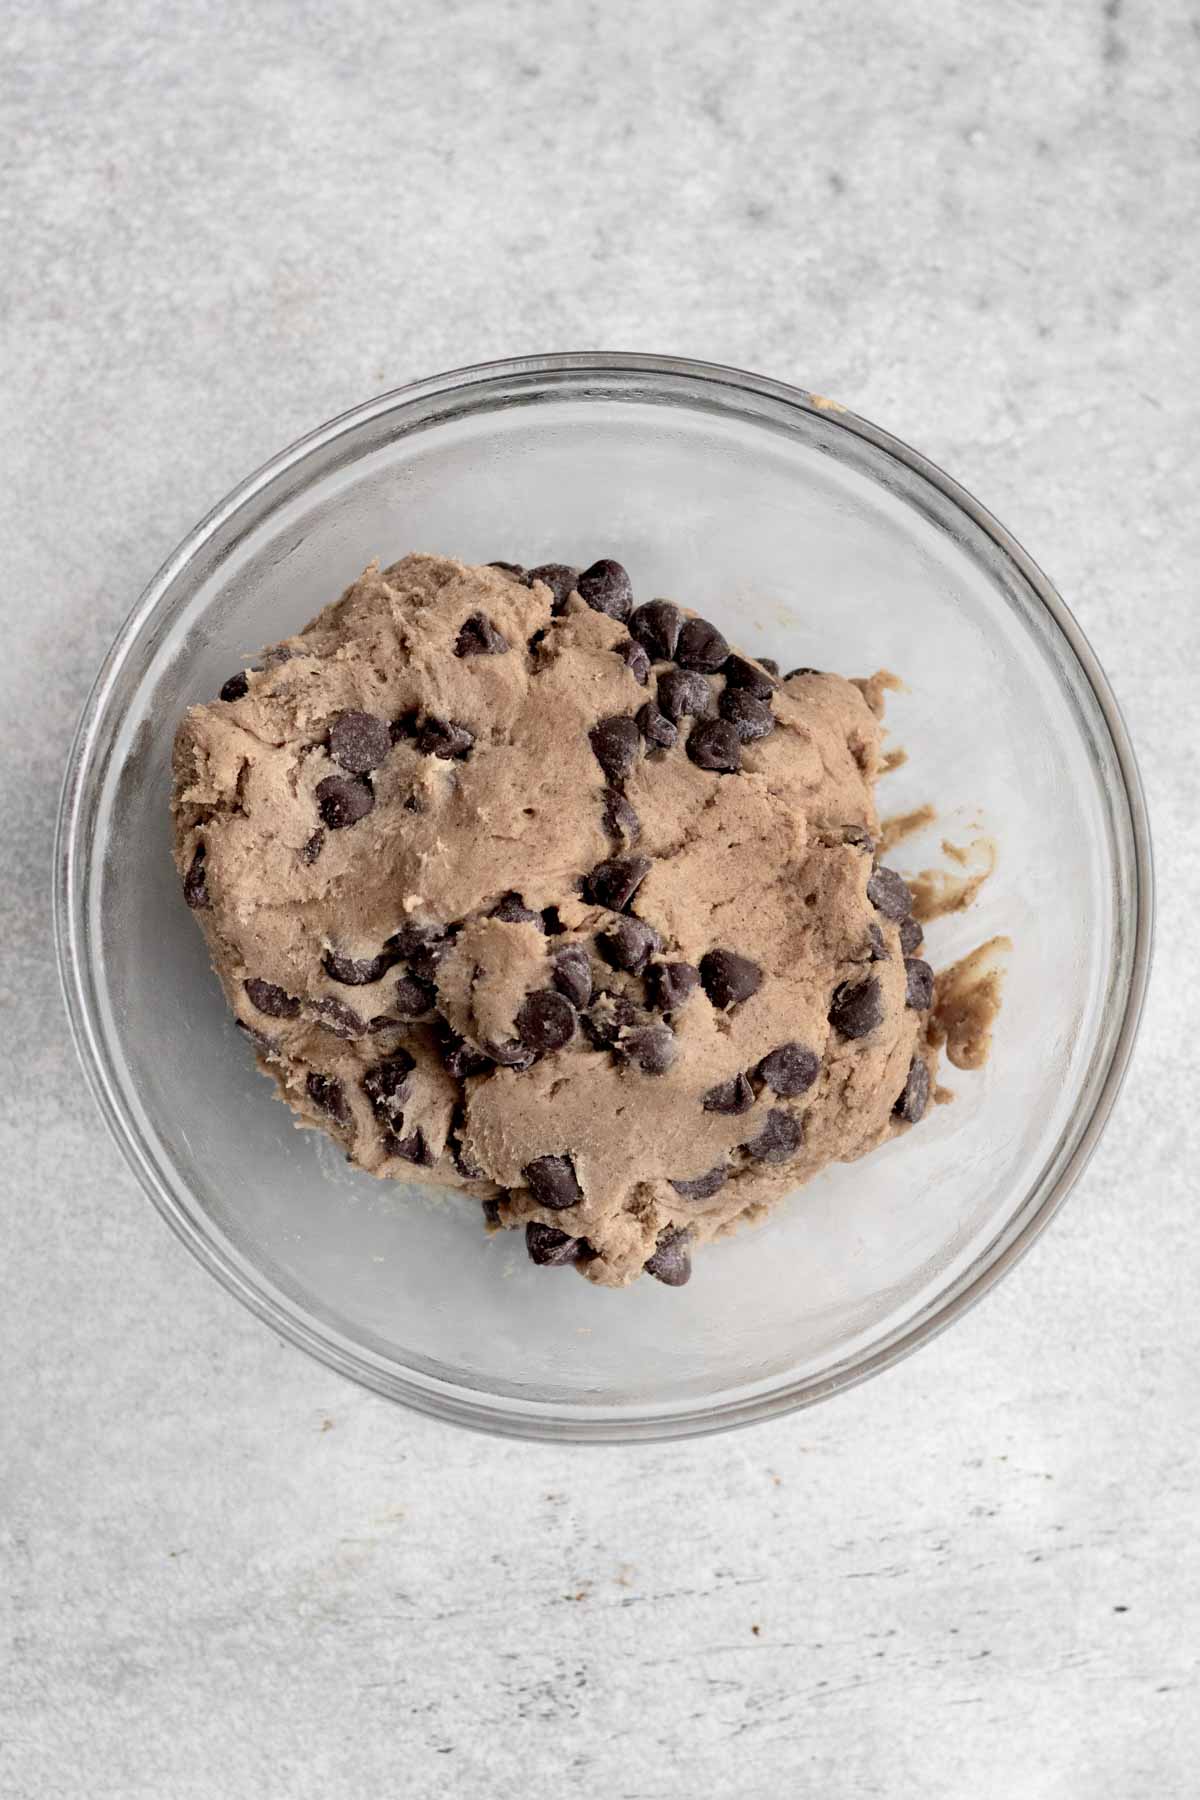 Chocolate chips mixed into the cookie batter.